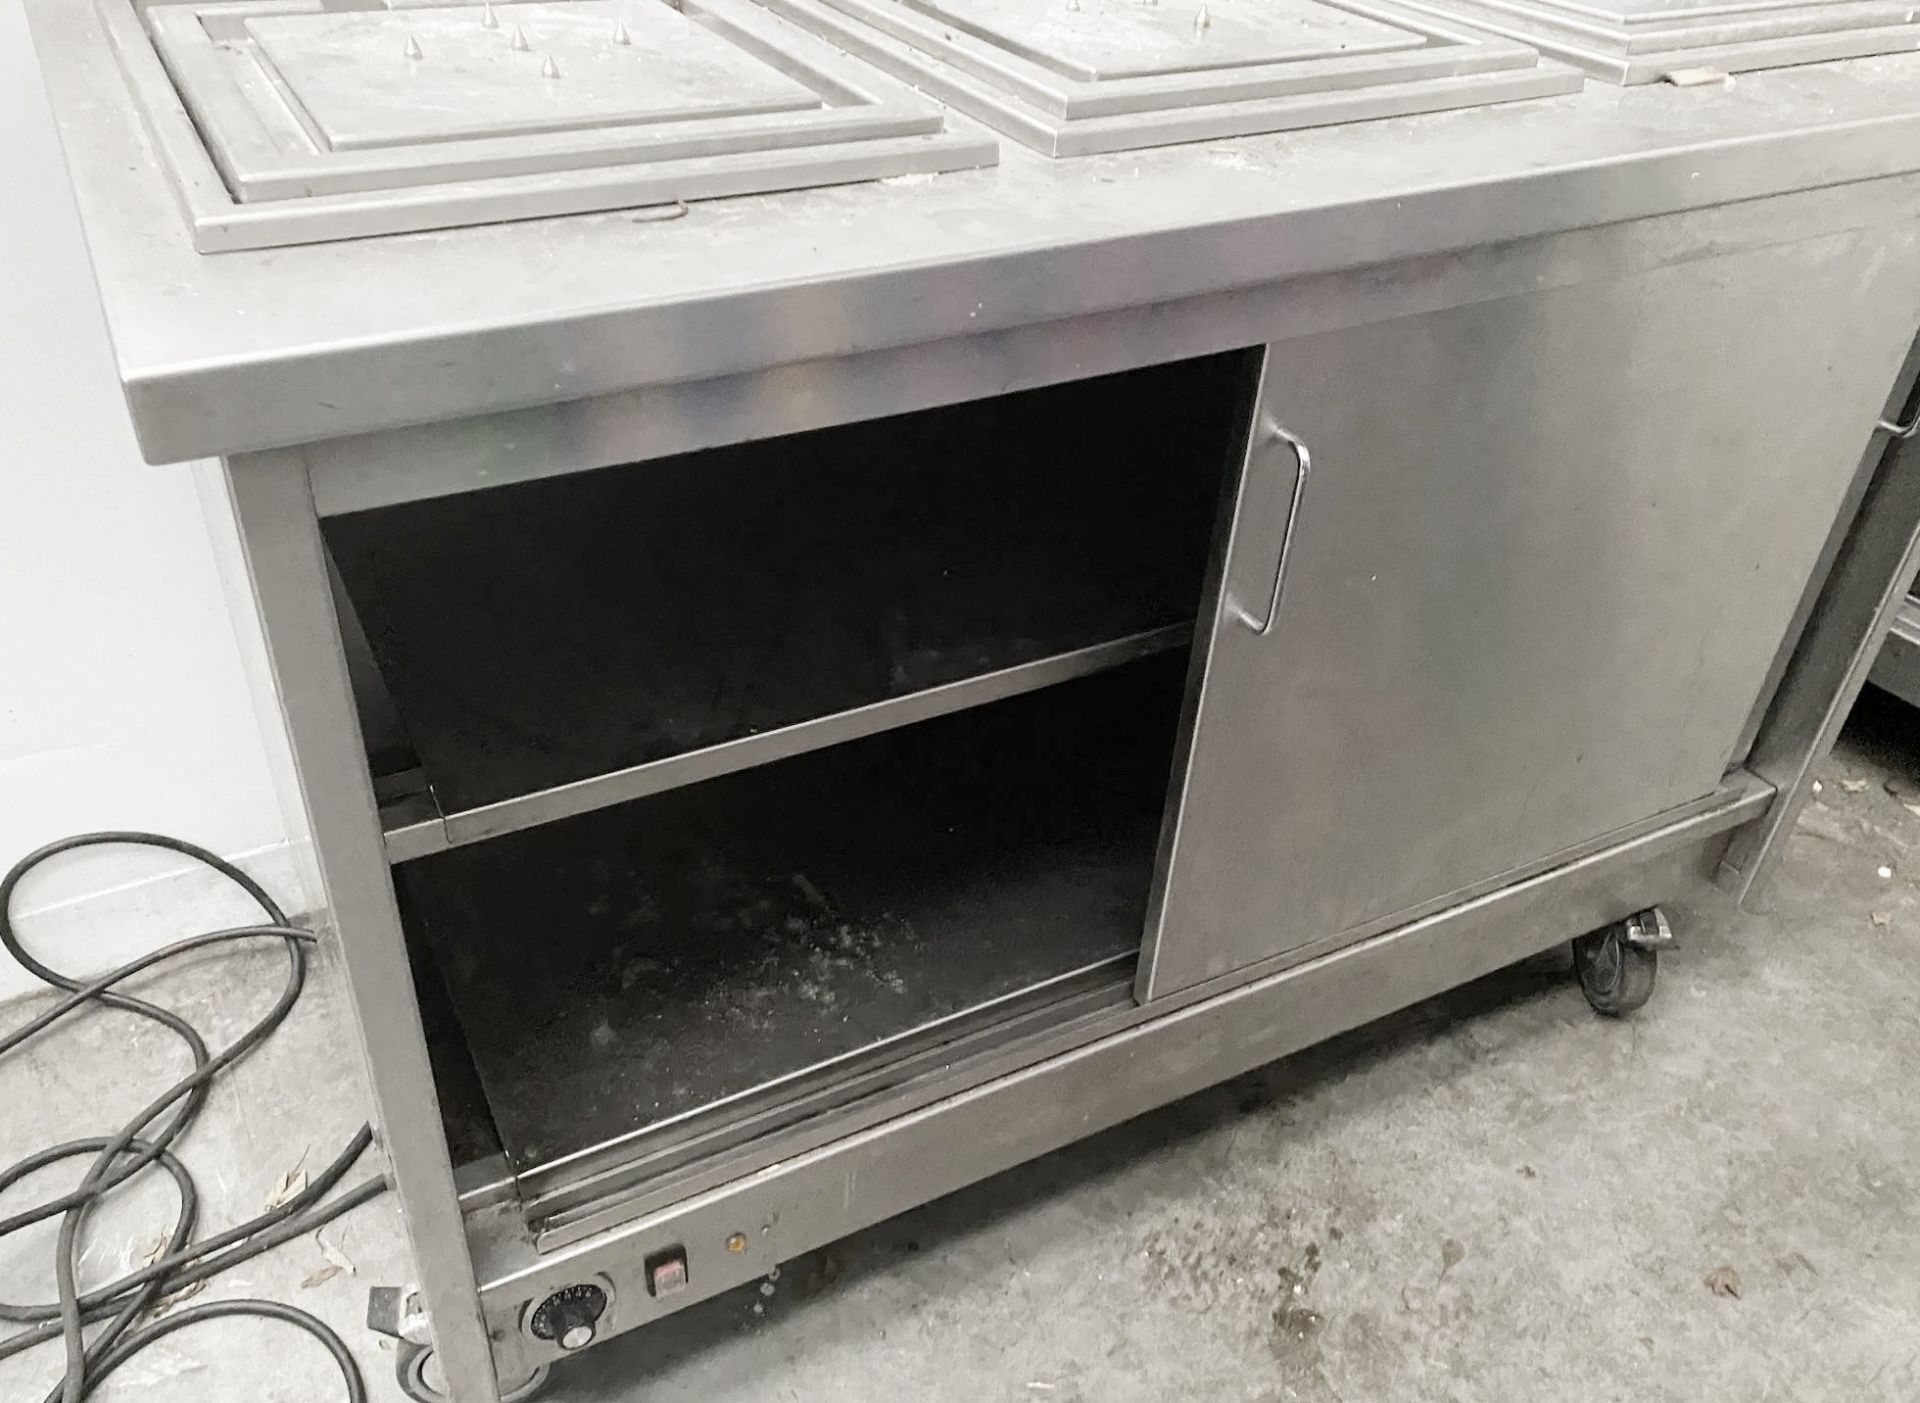 1 x Stainless Steel Carvery Hot Cabinet With Three Sections For Slicing Cooked Meats - Image 2 of 6